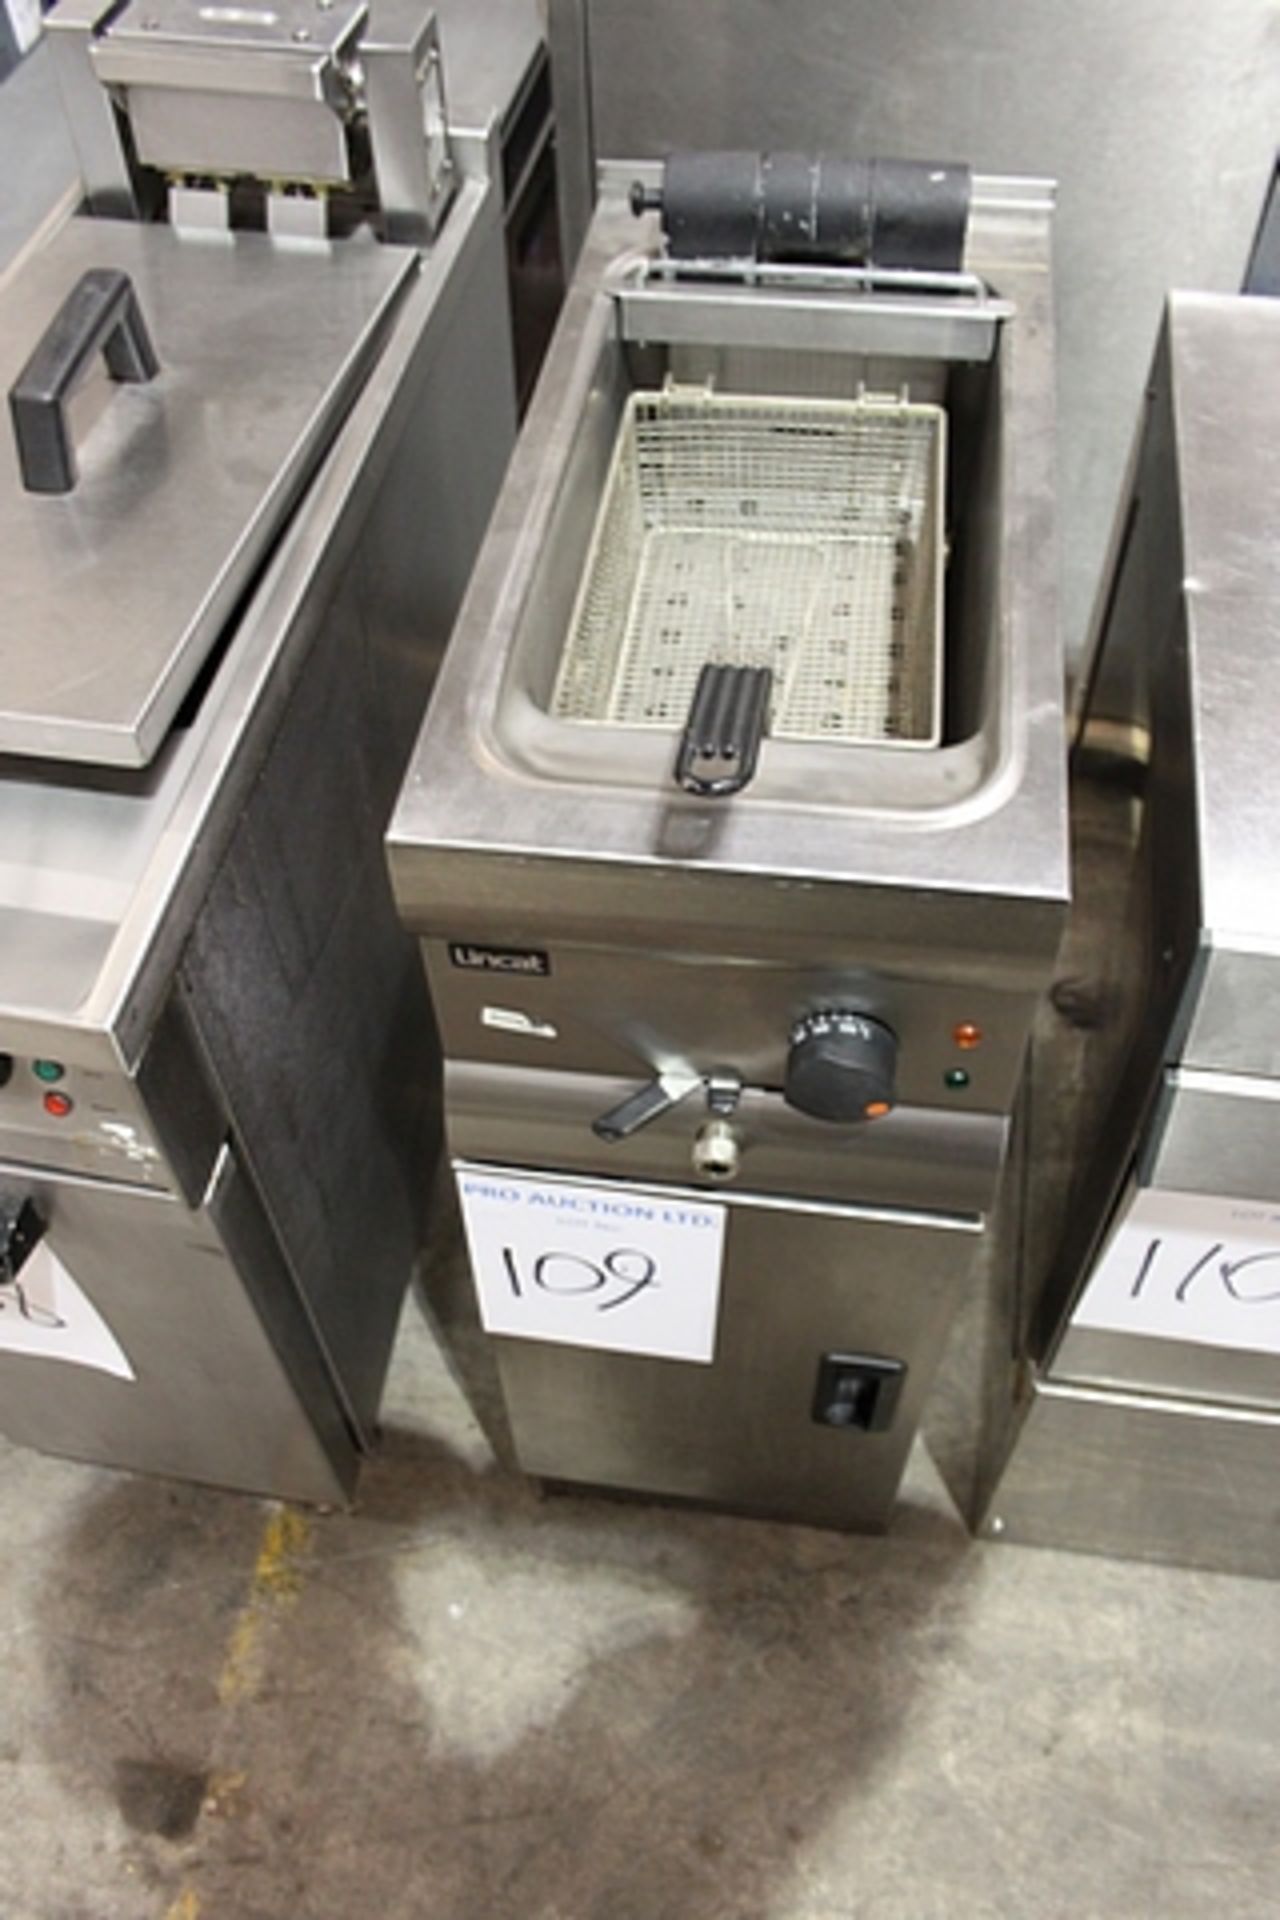 Lincat J6FL 9 Ltr Single Tank Fryer With 1 Basket free standing electric fryer which can cook 18